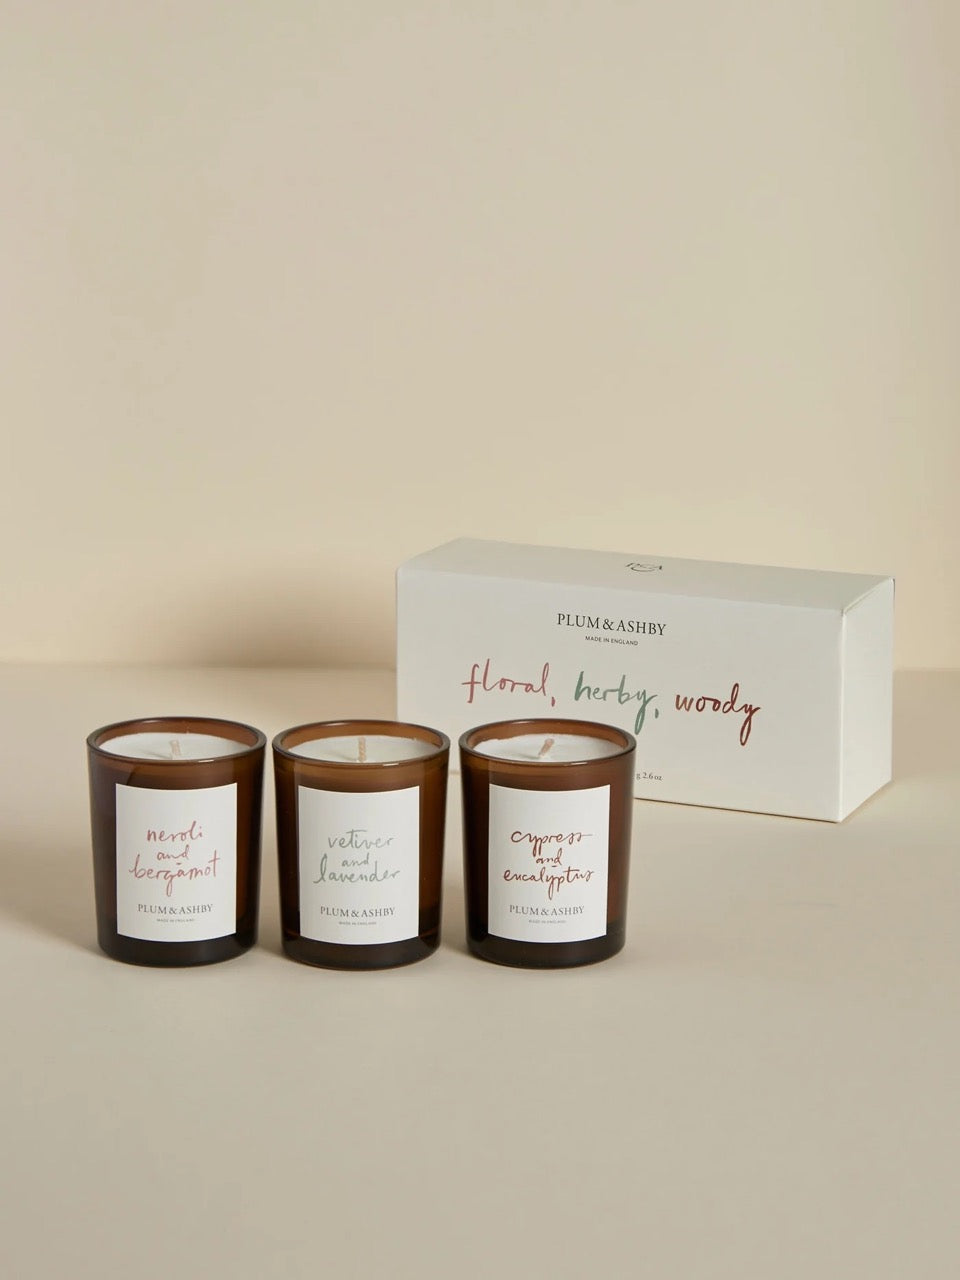 Plum and Ashby Votive set pack  FloralHerbyWoody